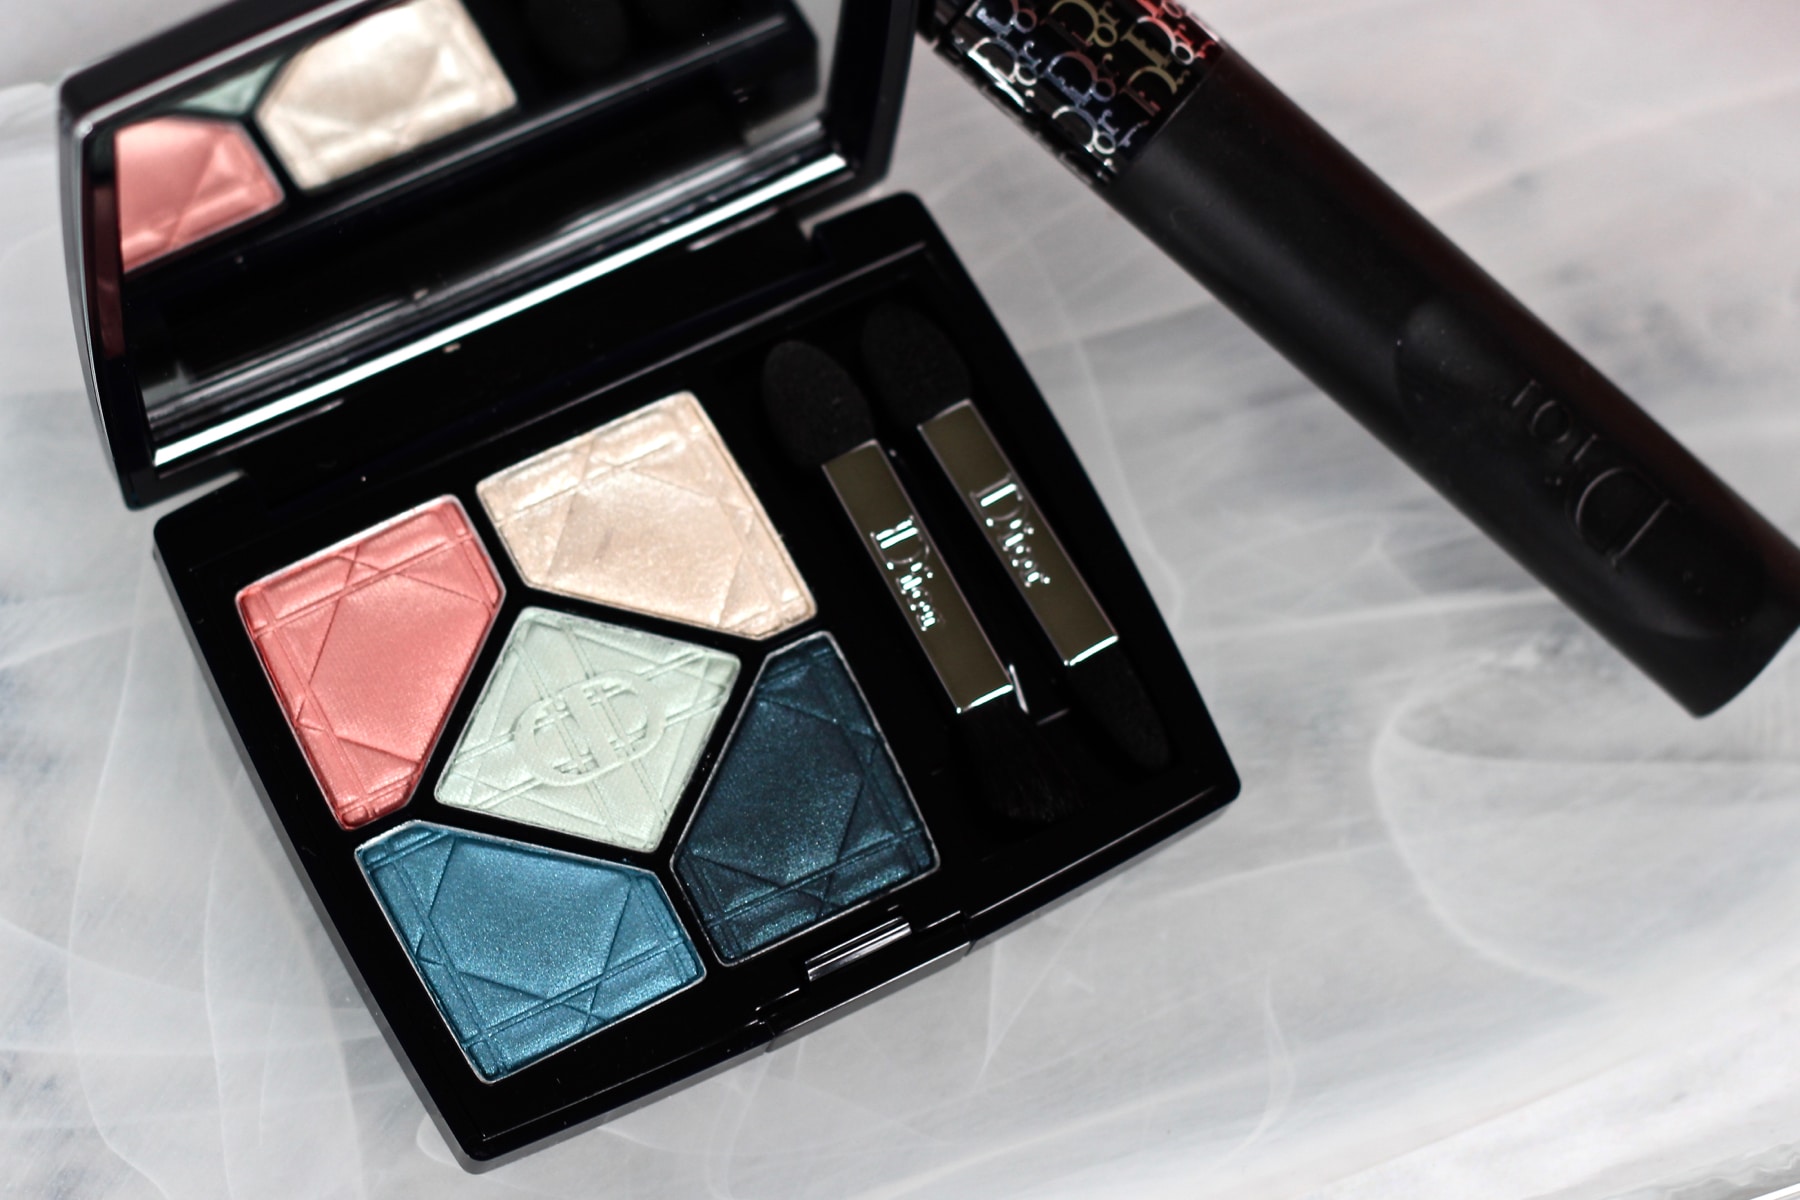 Dior 5 Couleurs Eyeshadow Palette in Electrify